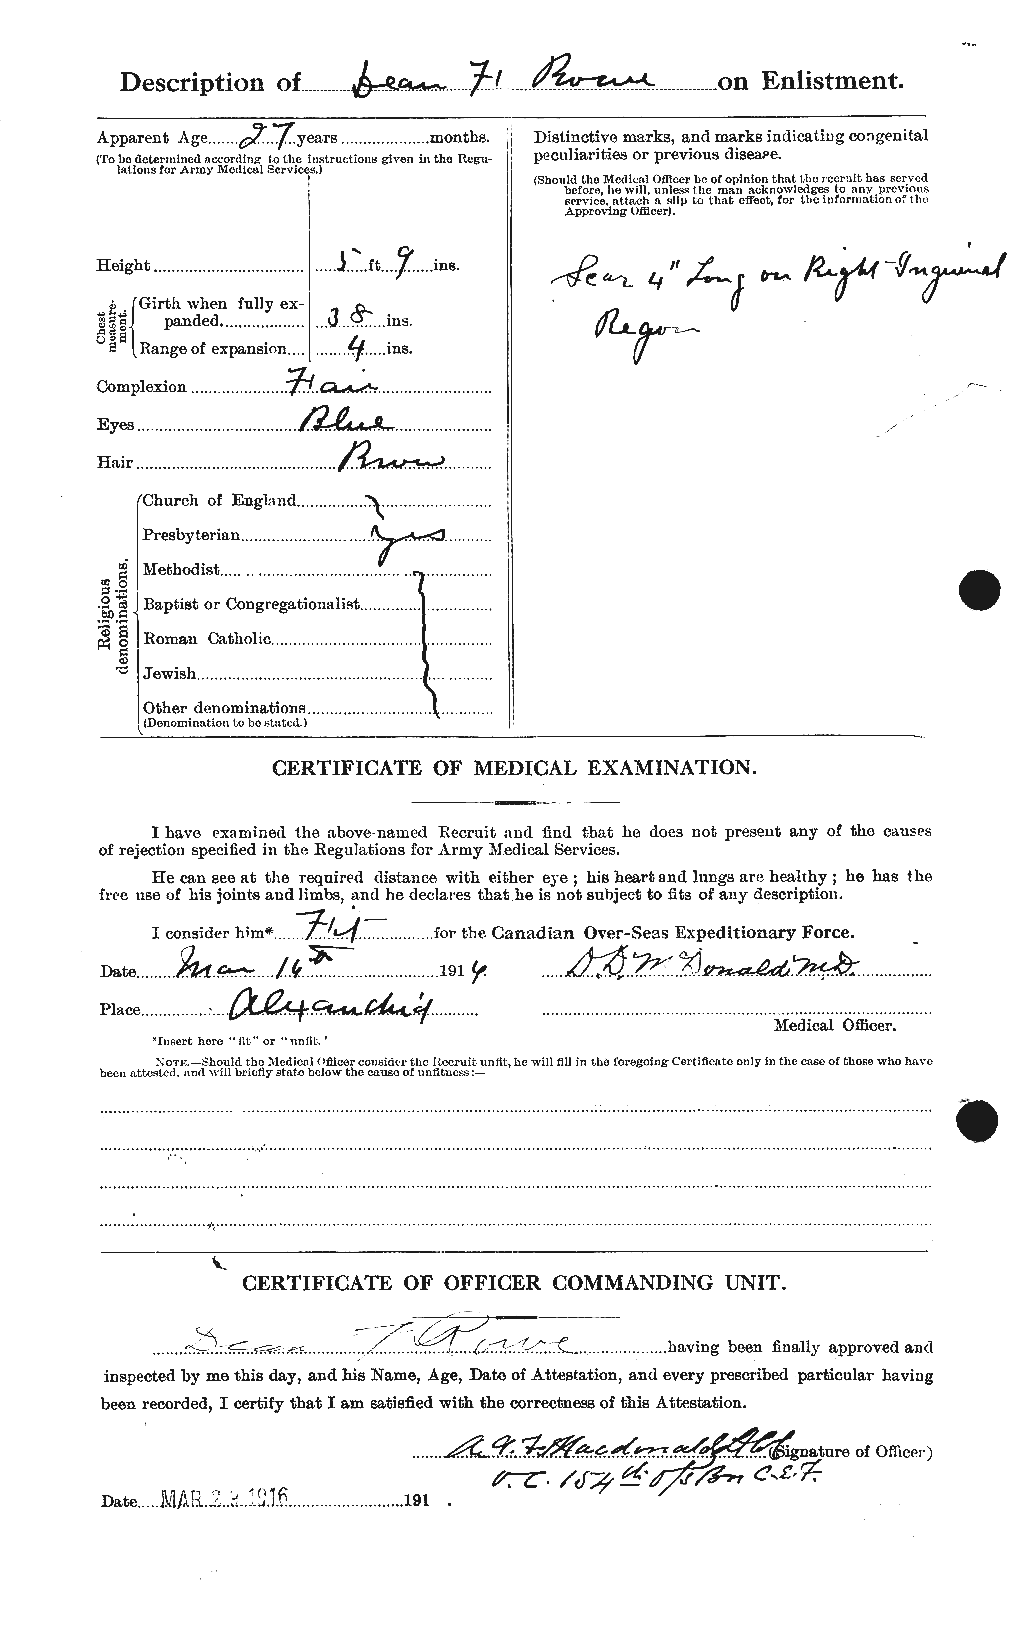 Personnel Records of the First World War - CEF 615829b